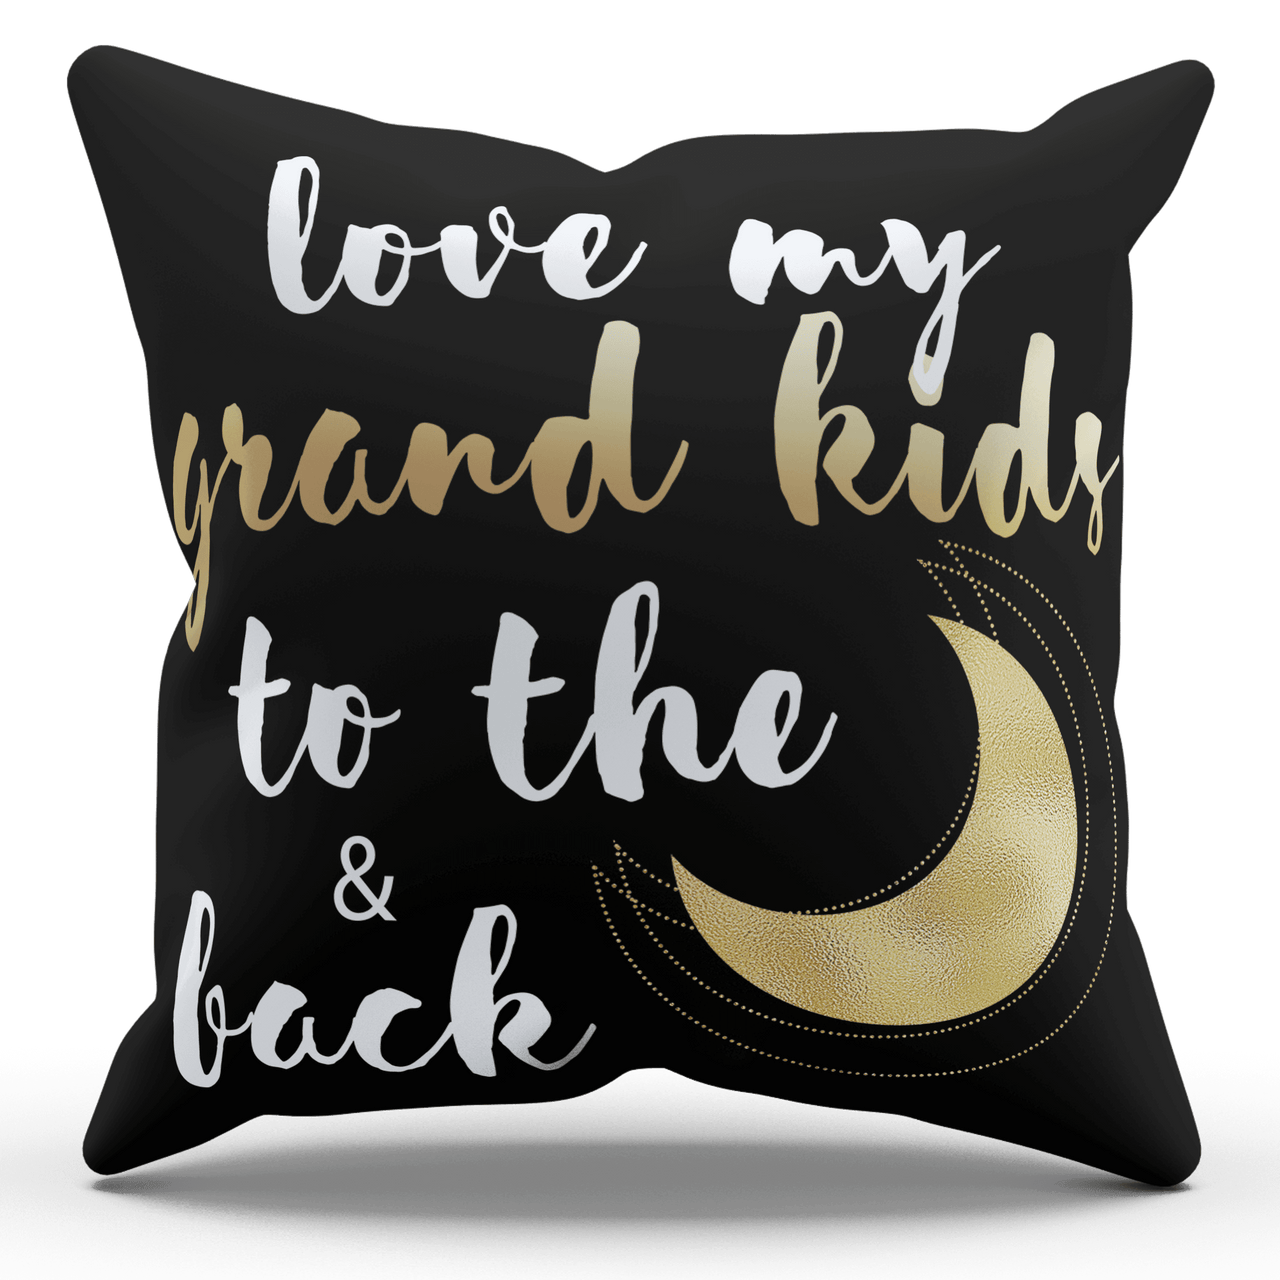 love my grandkids to the moon and back pillowcase